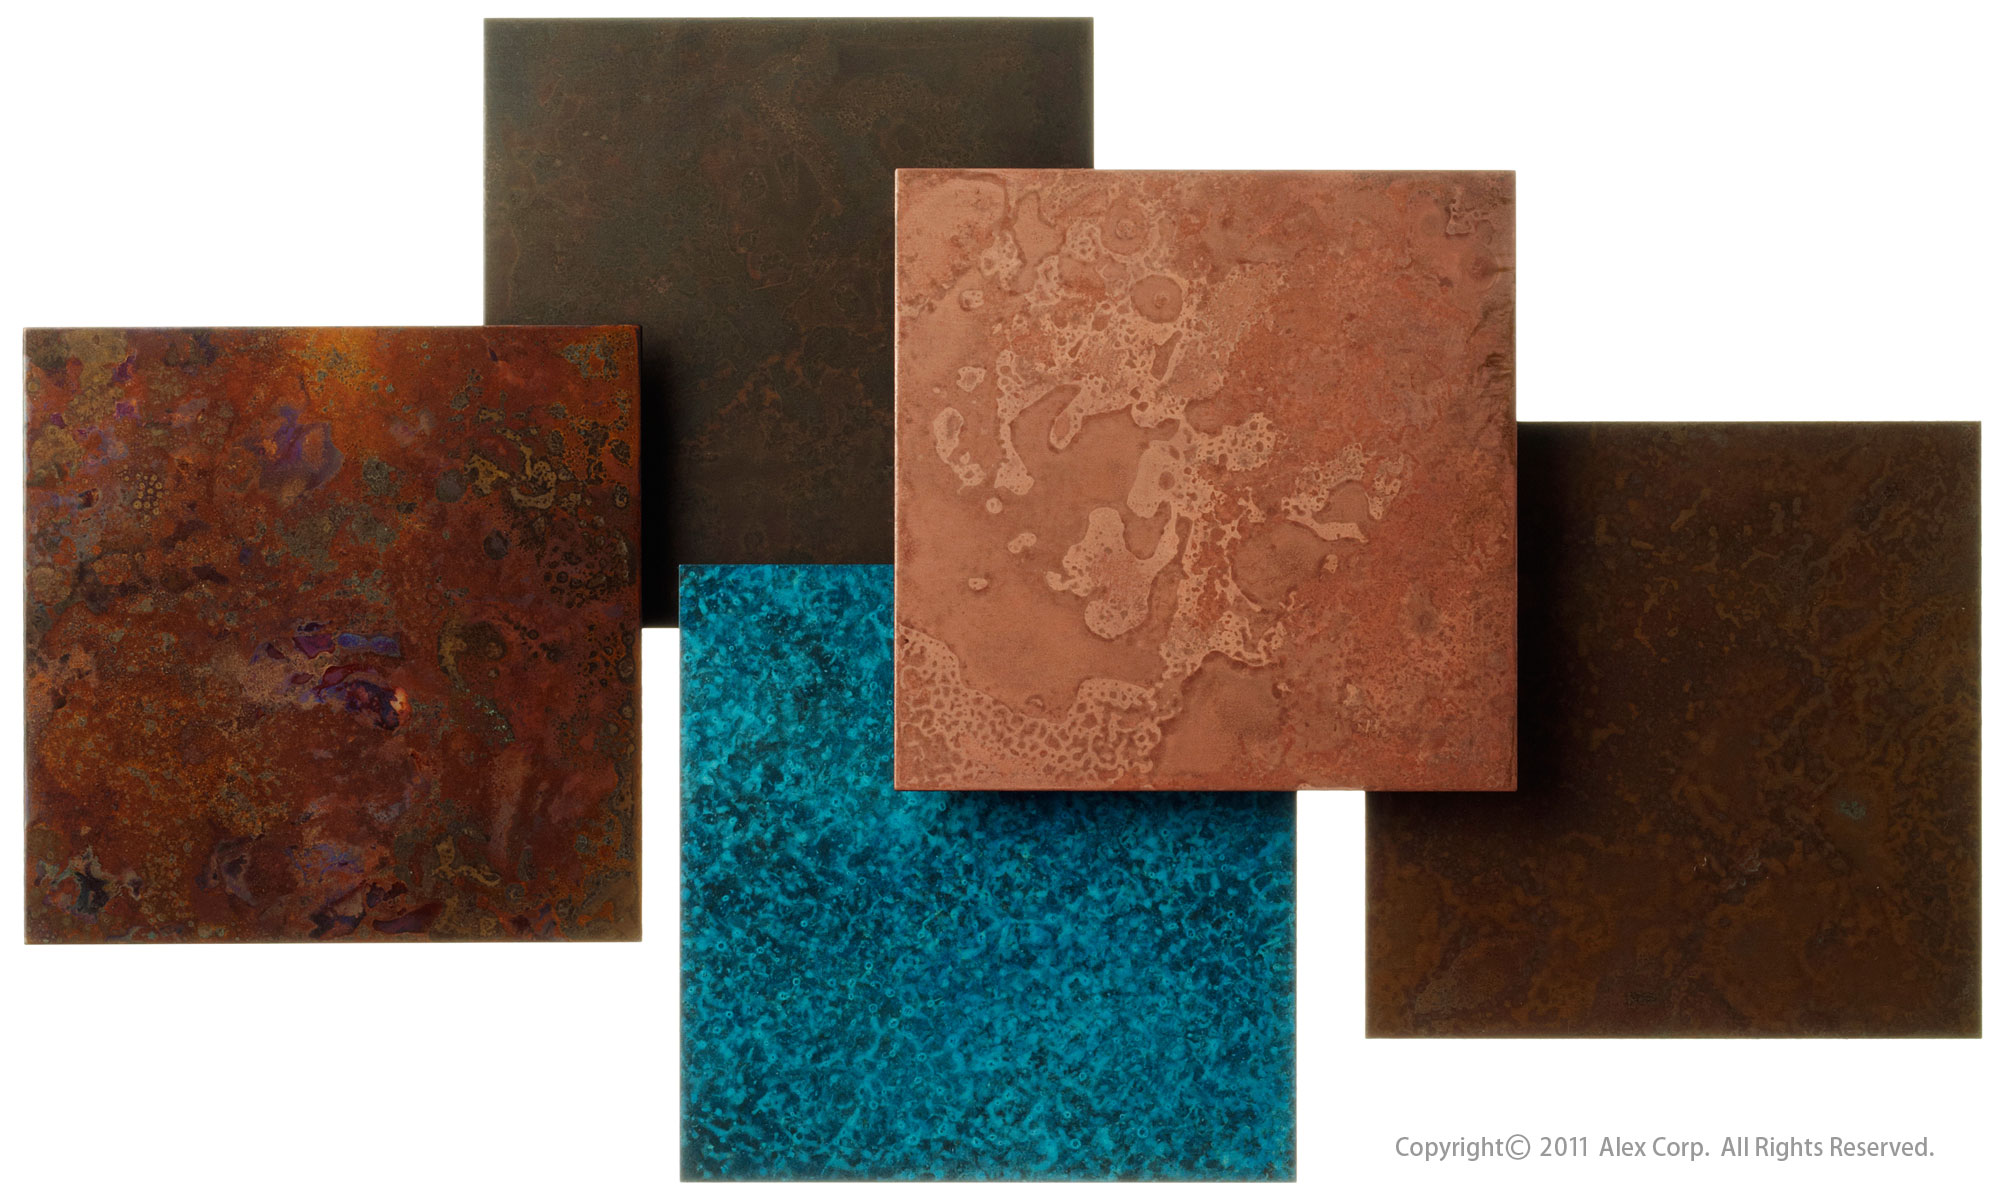 Patinized' Copper Coasters, ALEXCIOUS, Products